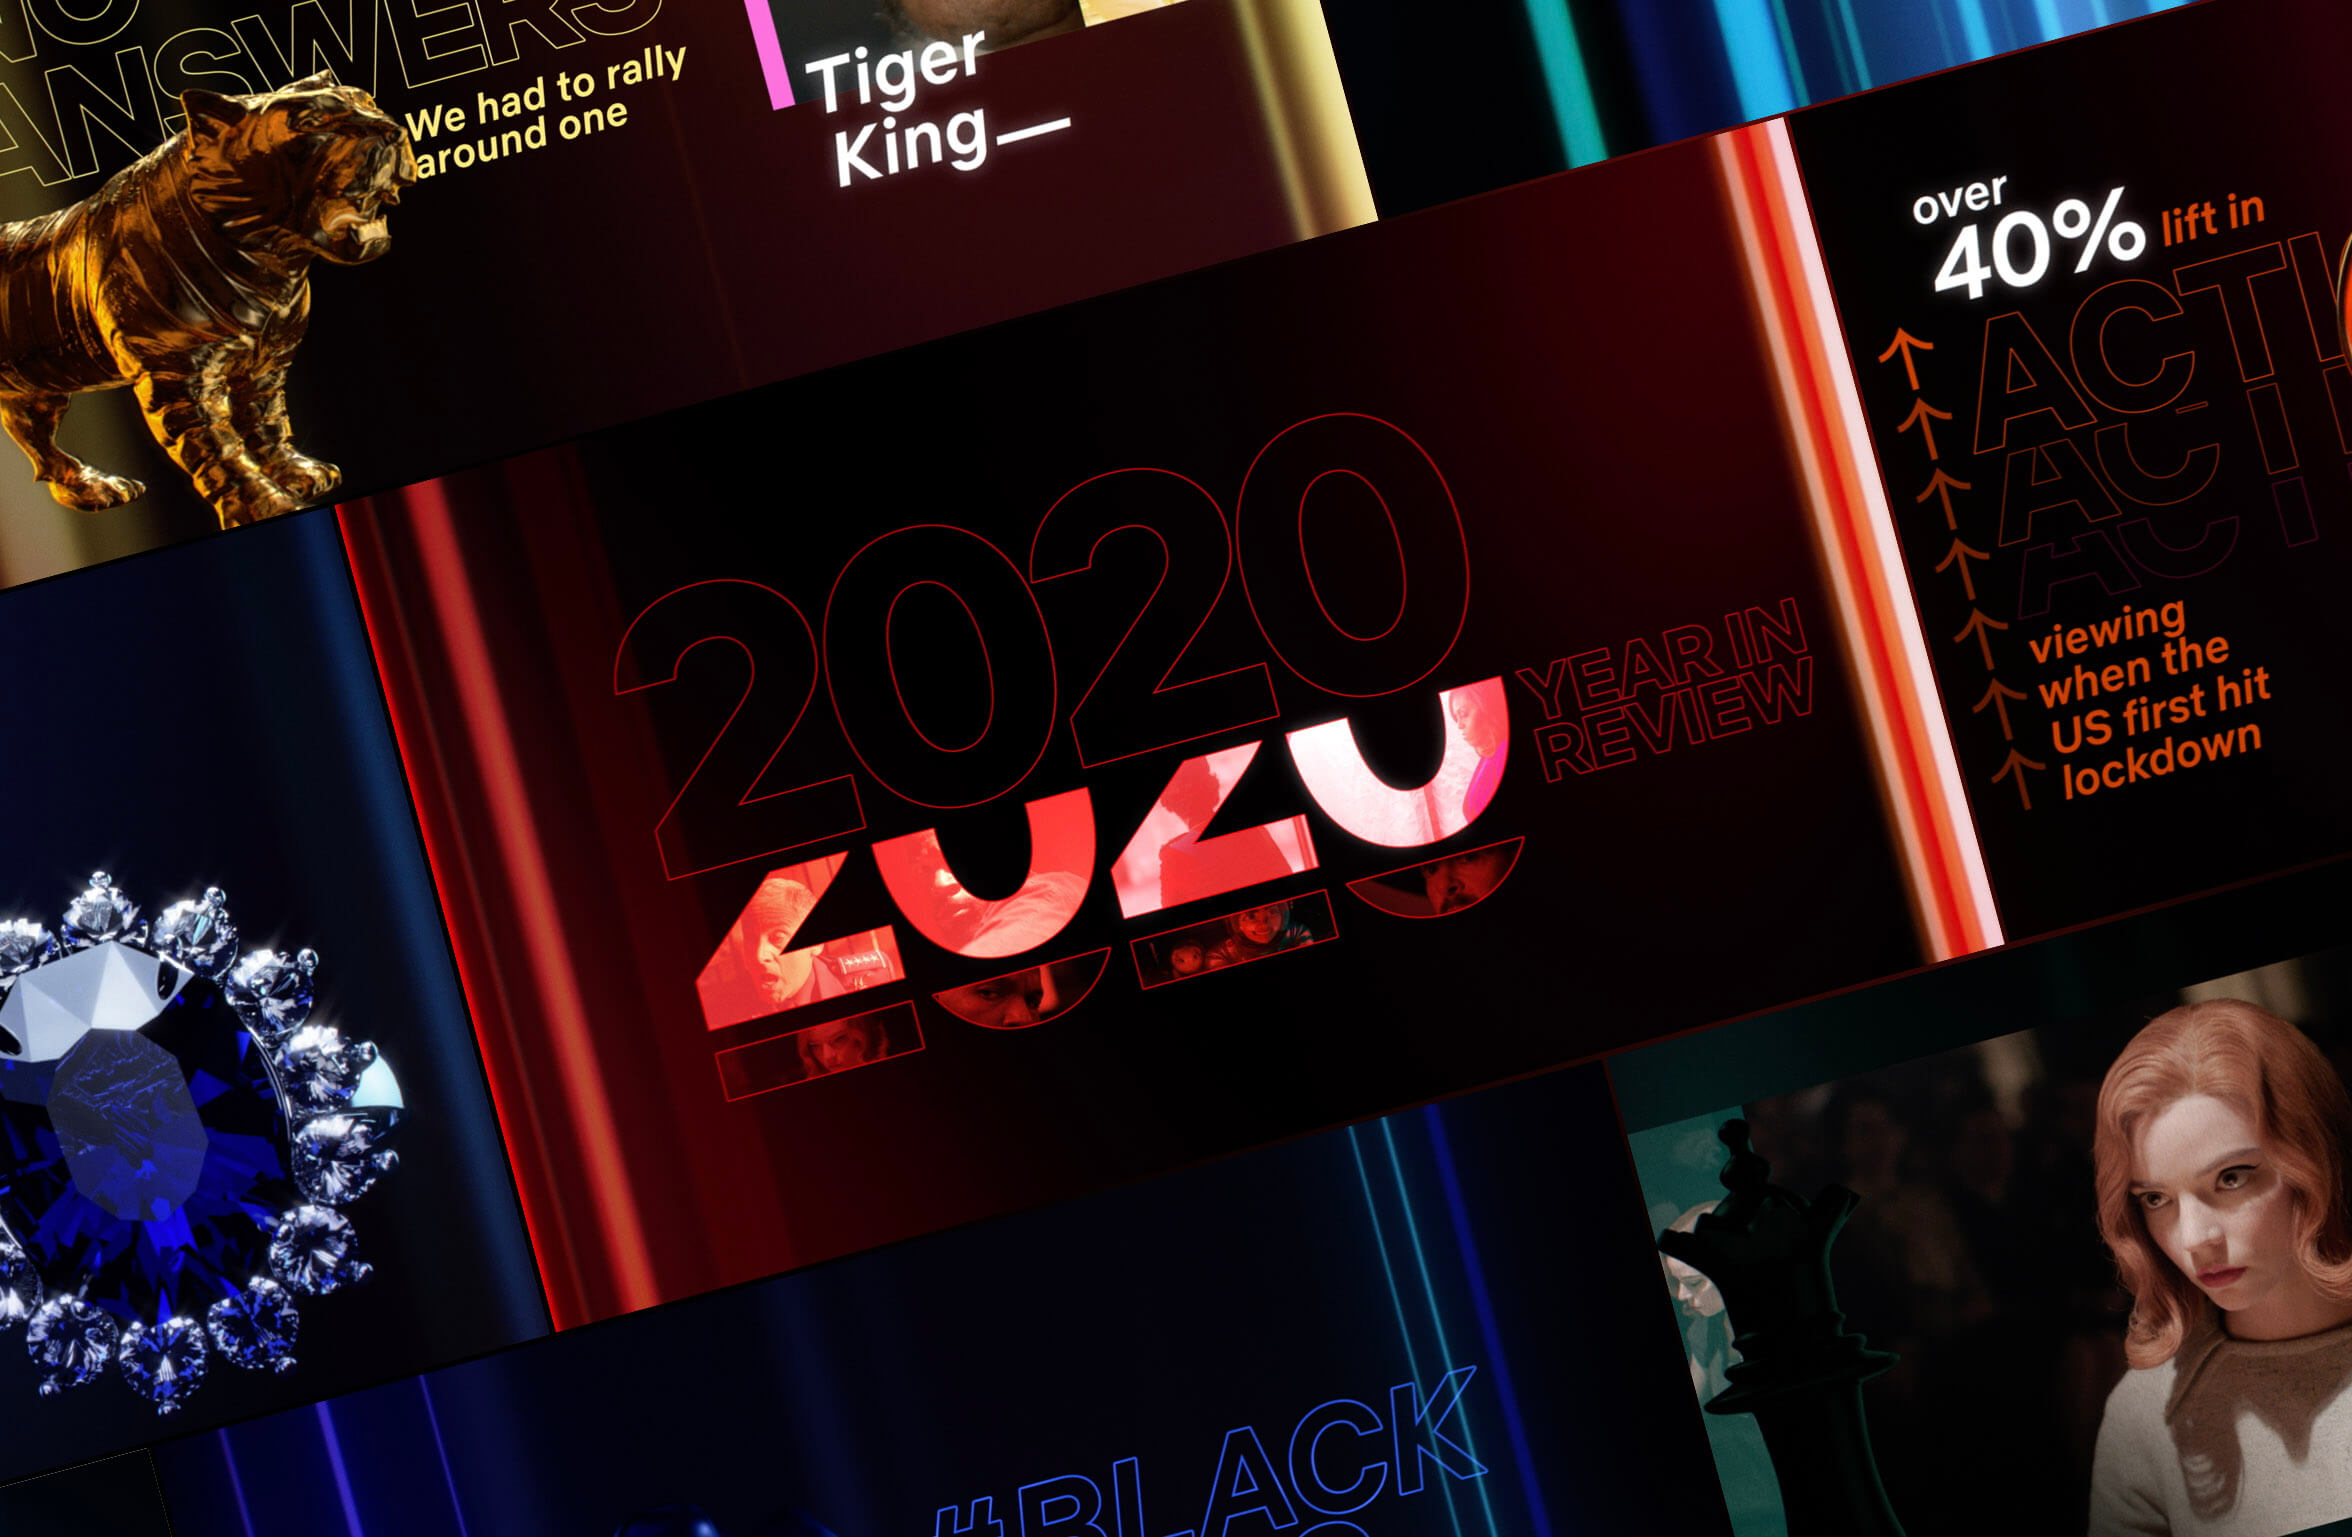 Image-Netflix: 2020 Year-in-Review Campaign